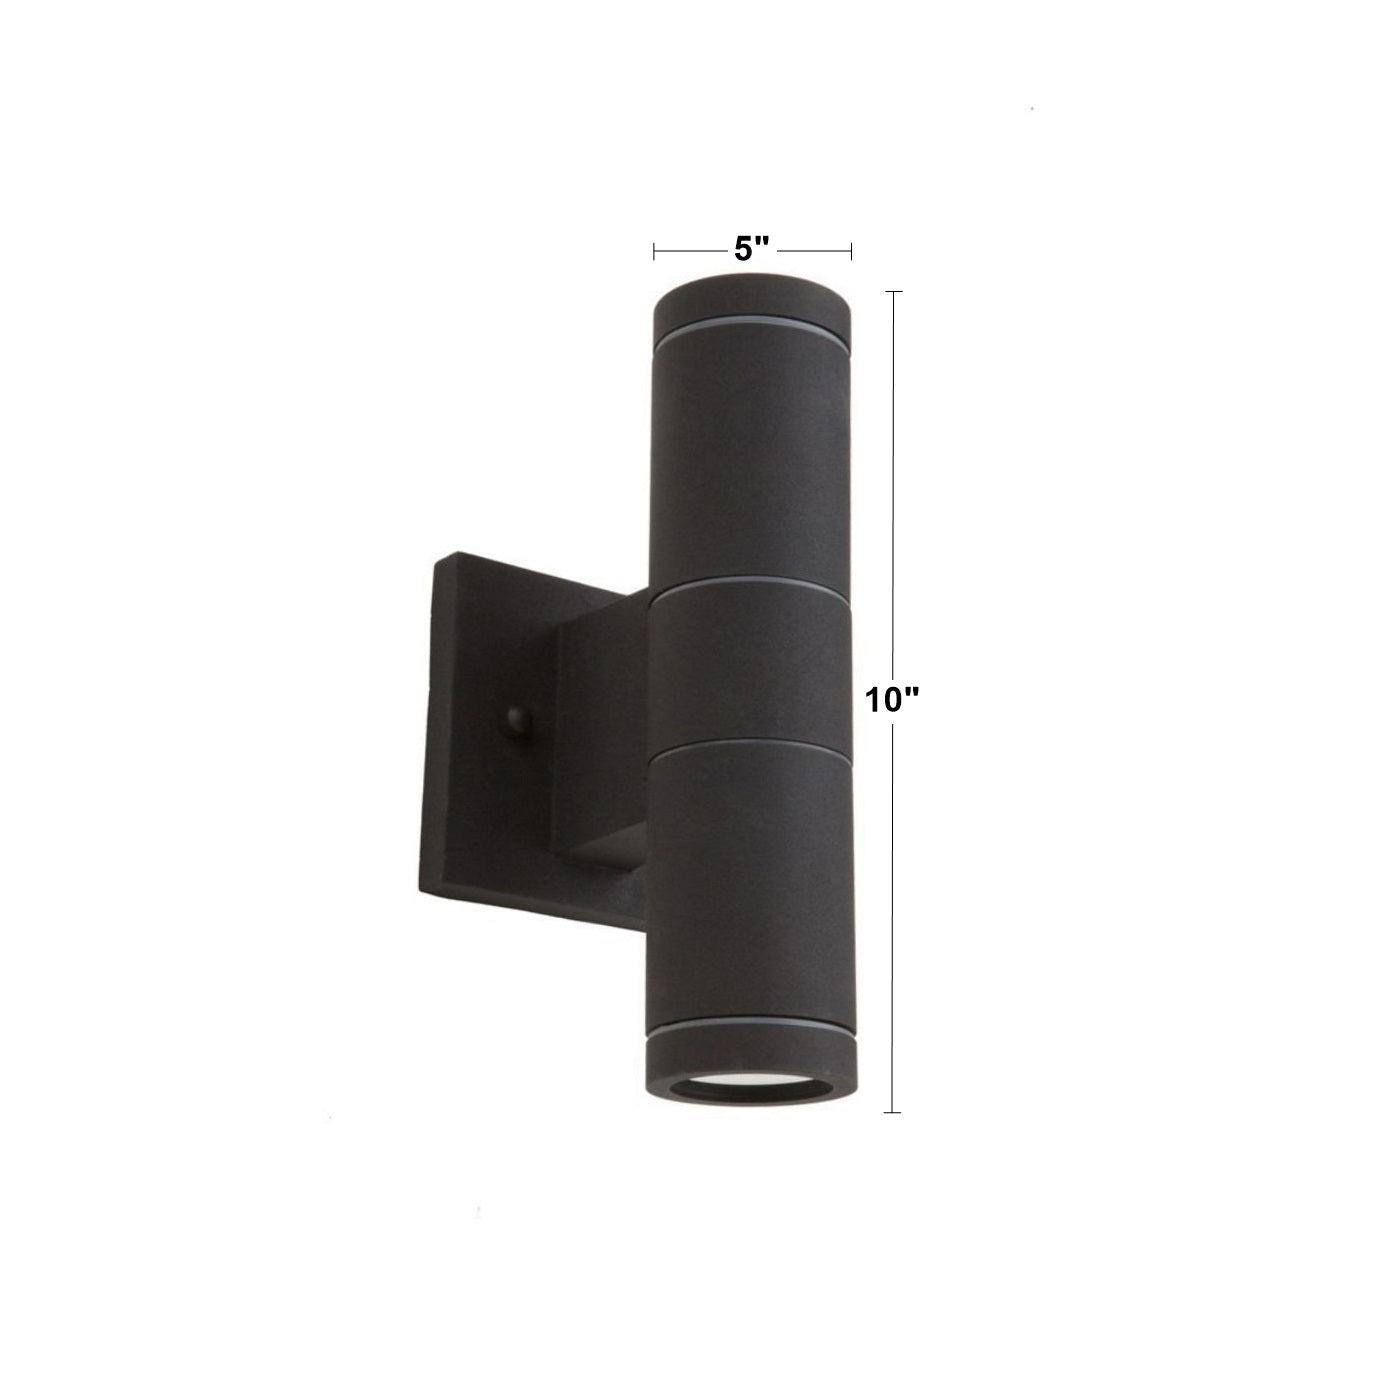 Nuevo 10 In 2 Lights Outdoor Cylinder Wall Light Up/Down Lights Matte Black Finish